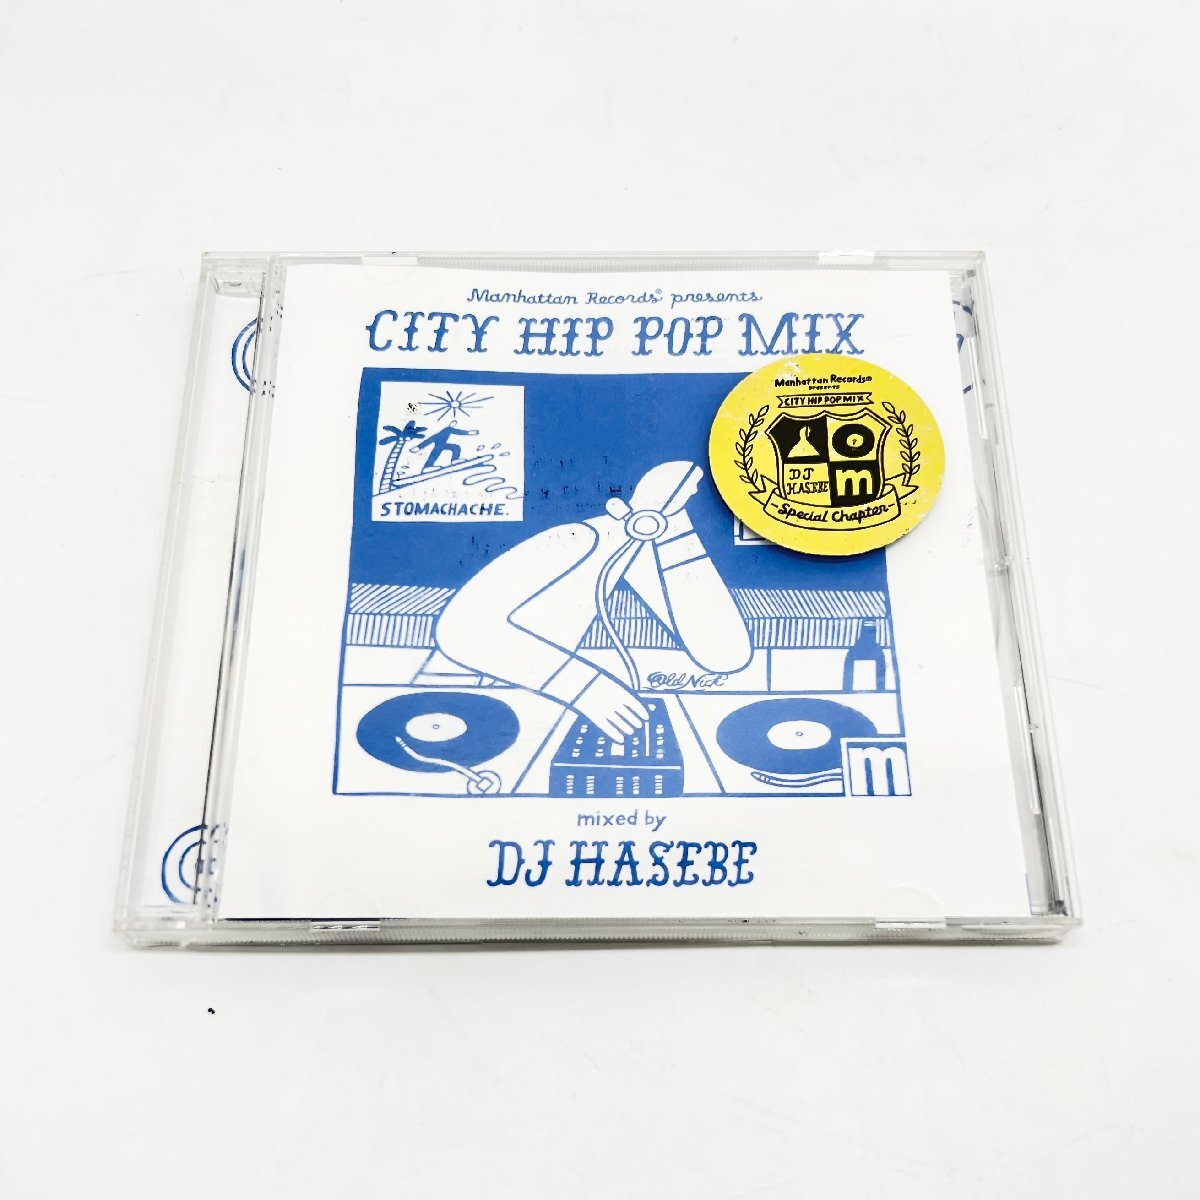 ◎L291 Manhattan Records マンハッタンレコード CITY HIP HOP MIX mixed by DJ HASEBE (ma)_画像1